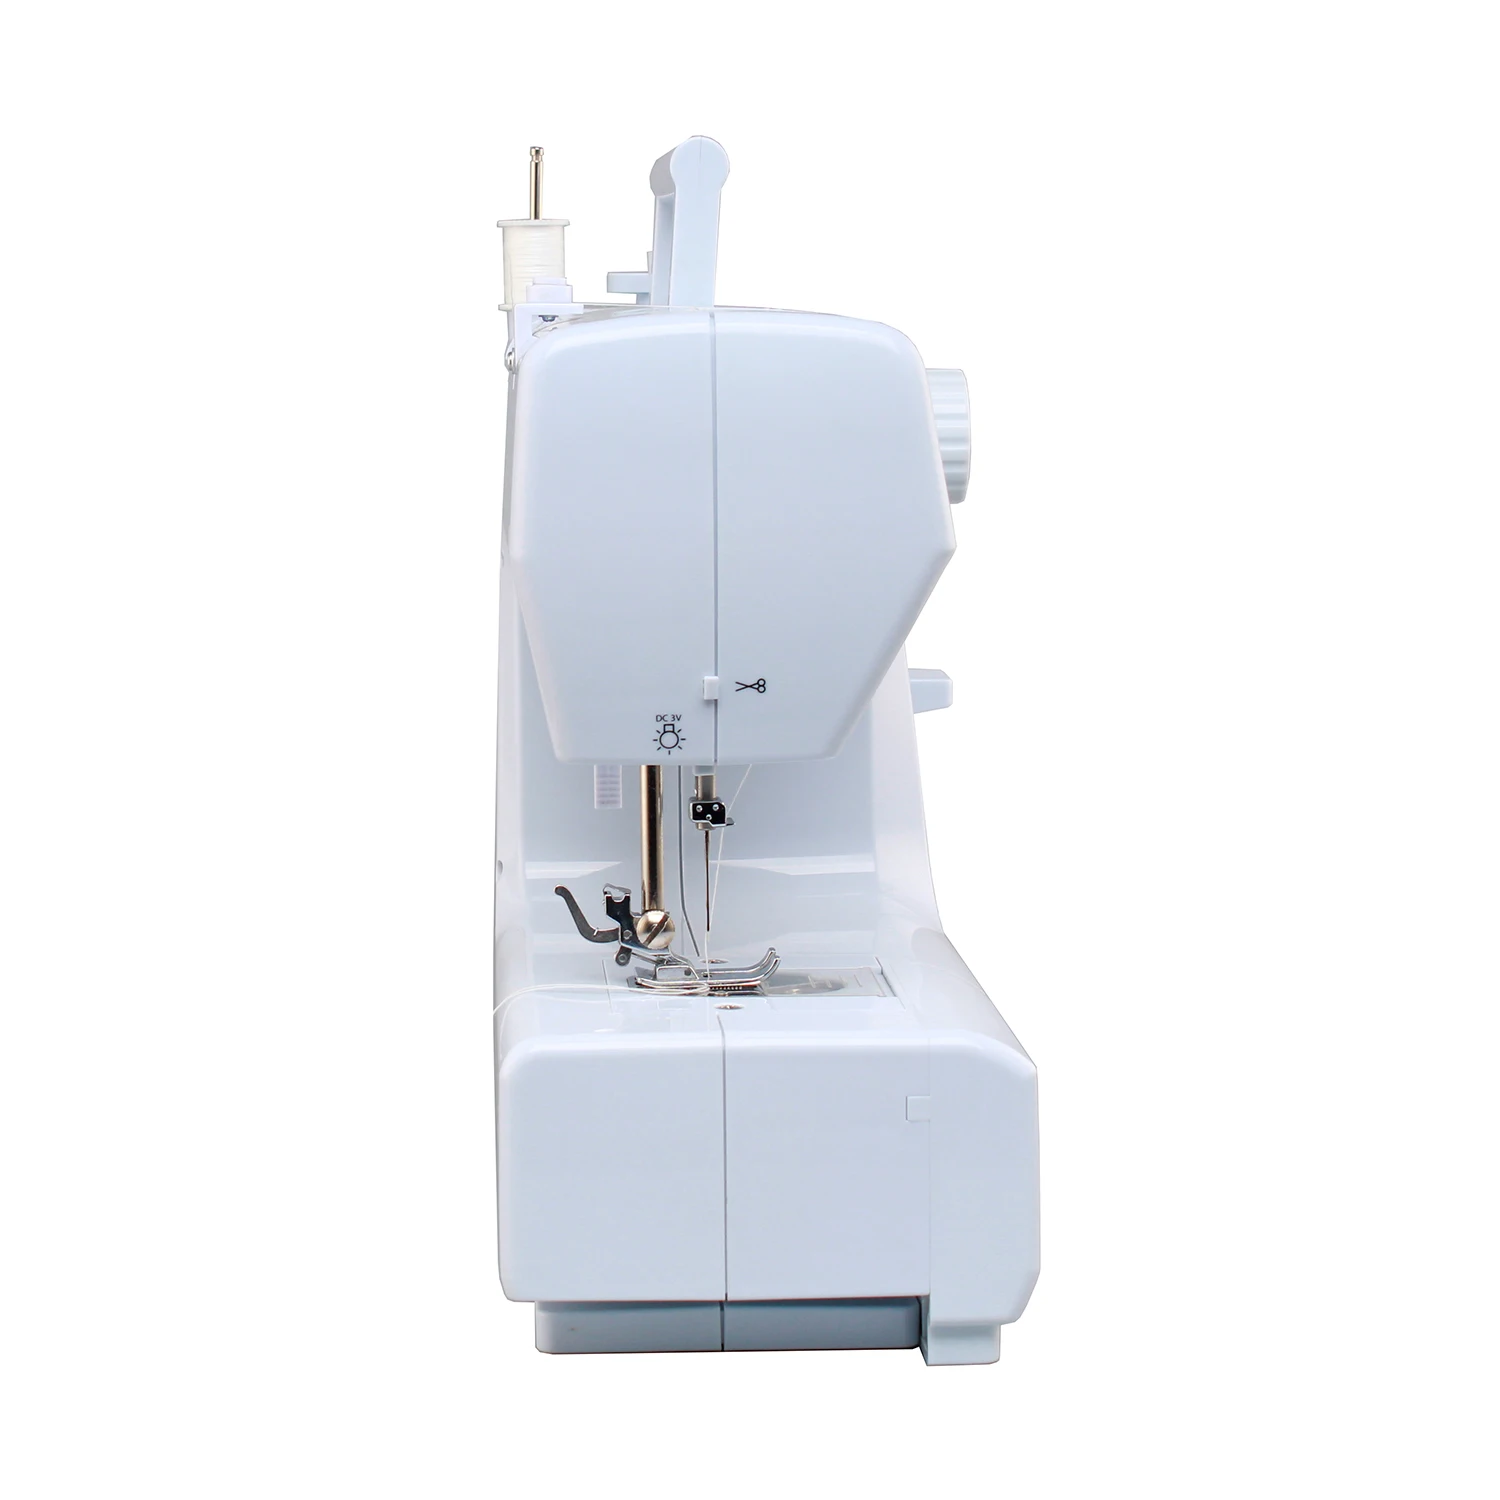 VOF FHSM-618 newly tailoring leather machine for sewing Electric starter buttonhole bobbin cloth Sewing Machine